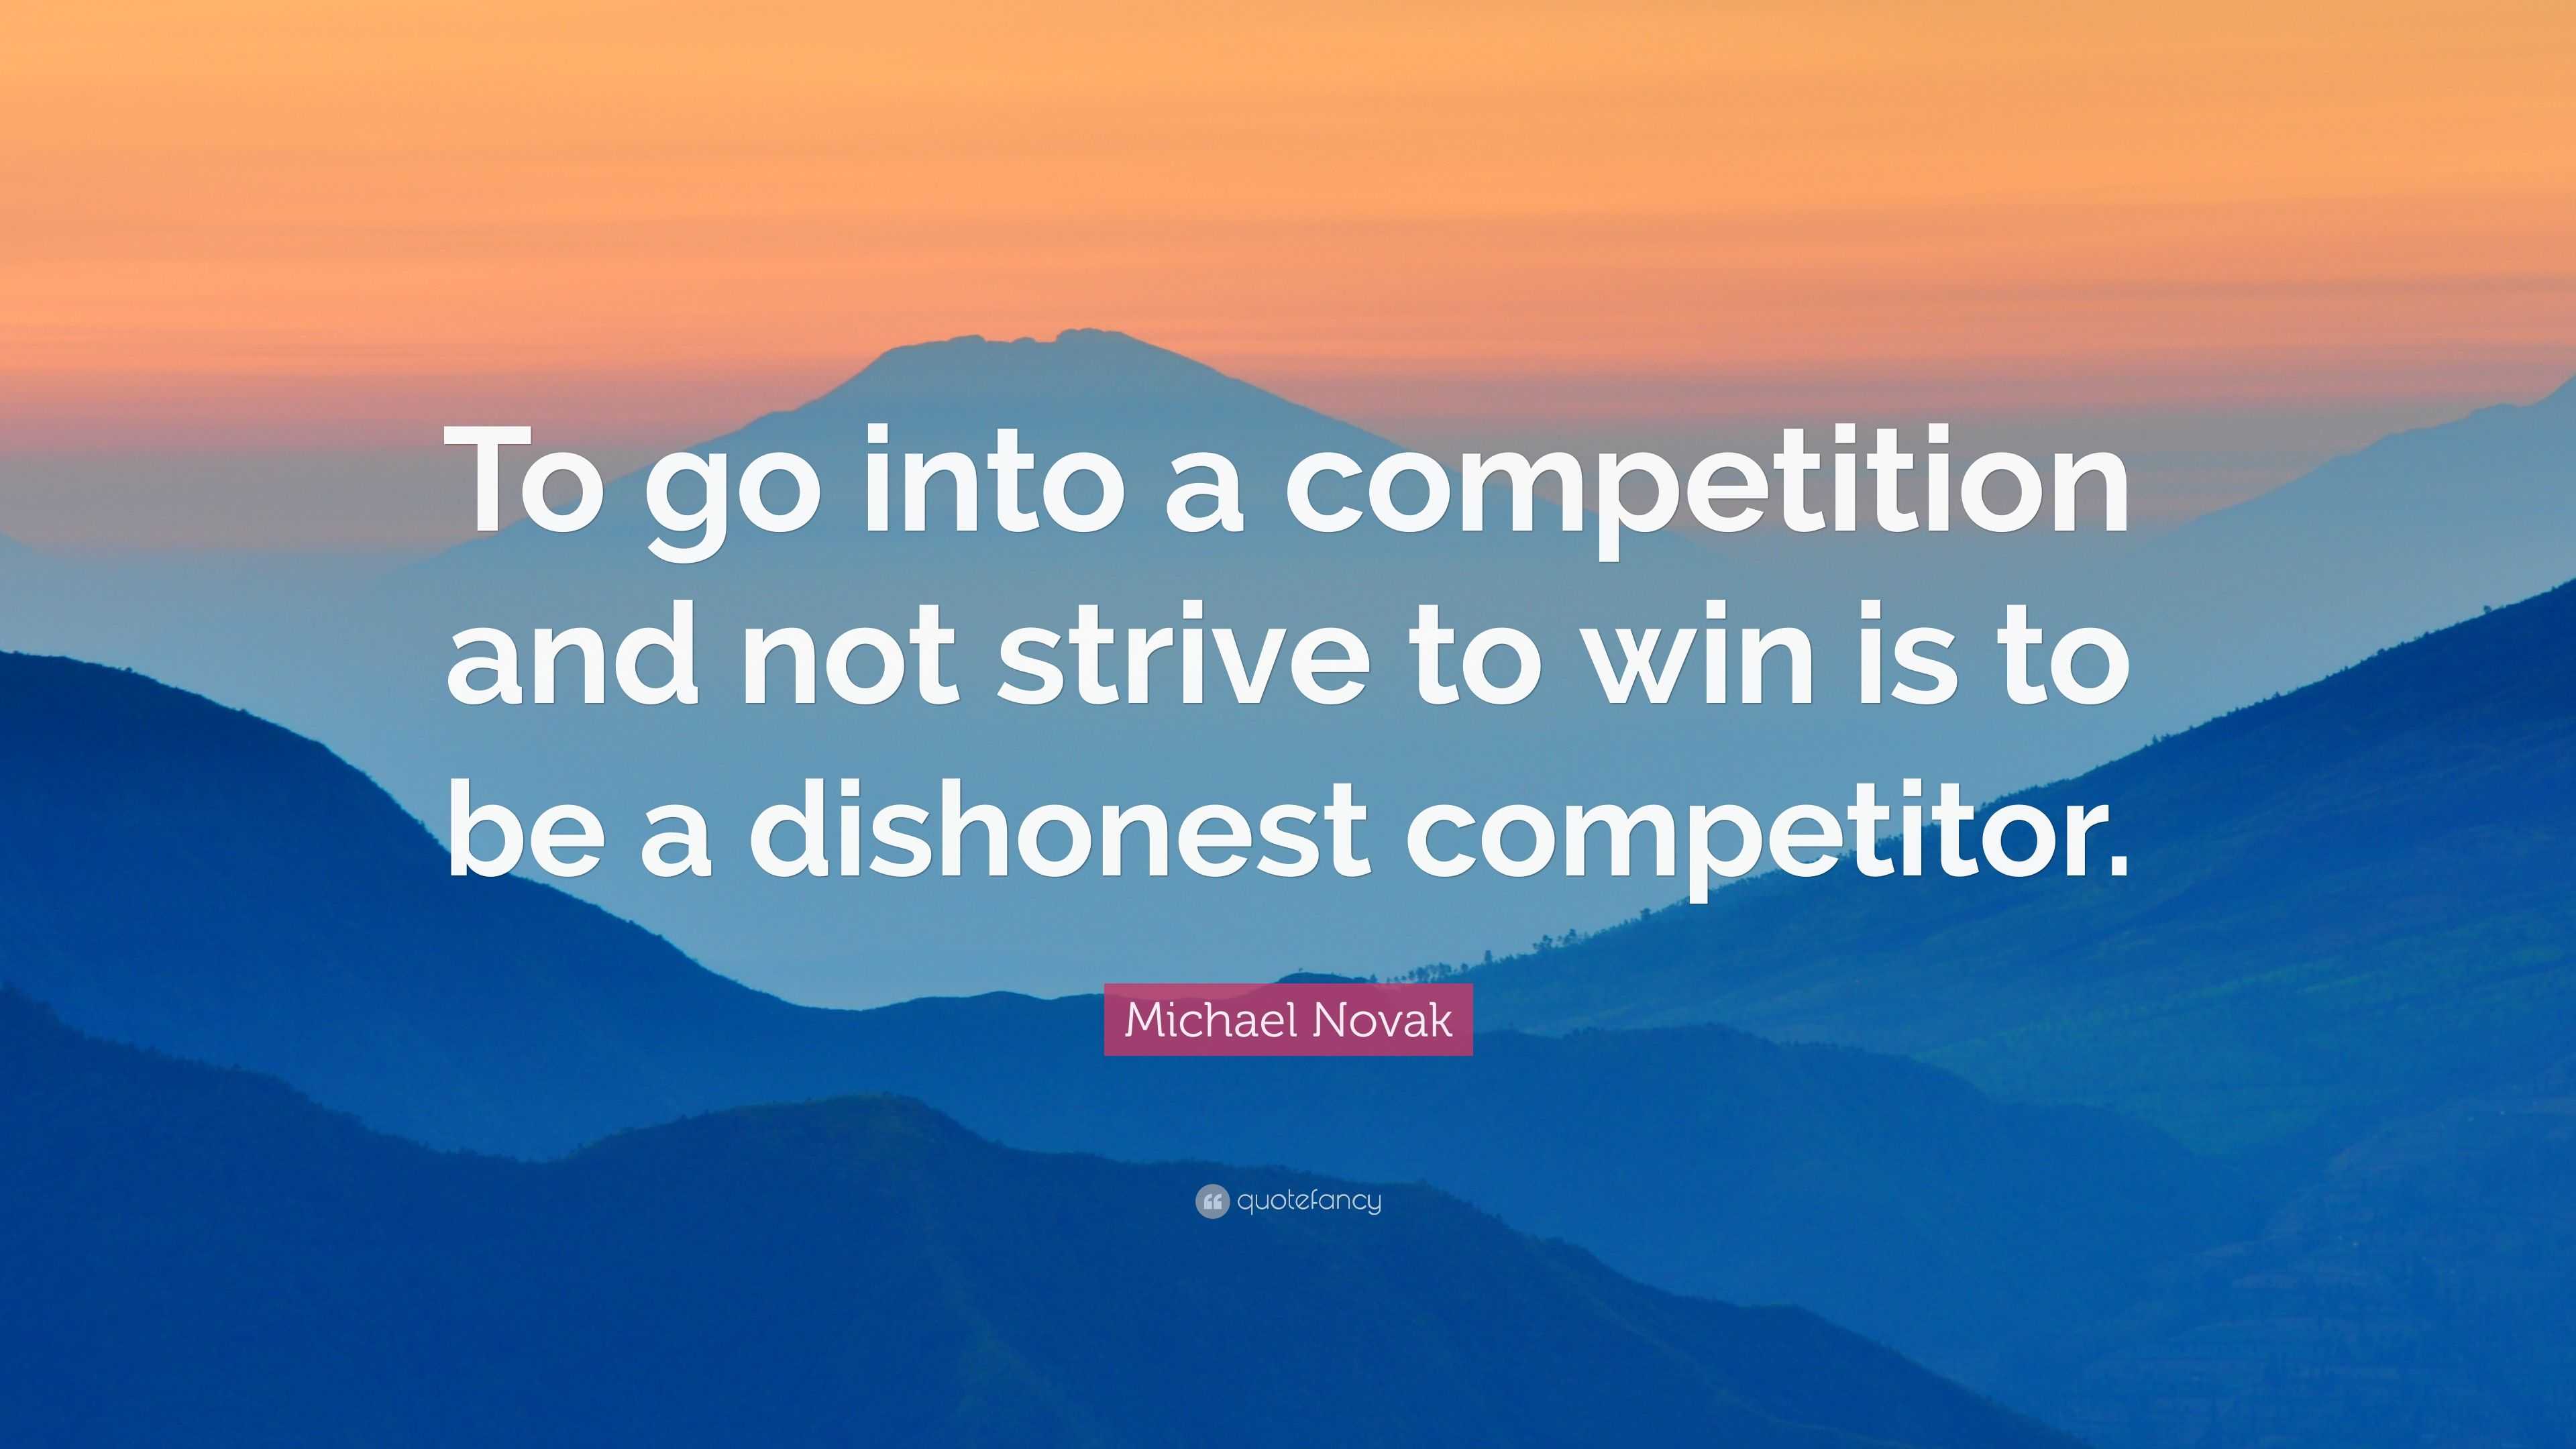 Michael Novak Quote: “To go into a competition and not strive to win is ...